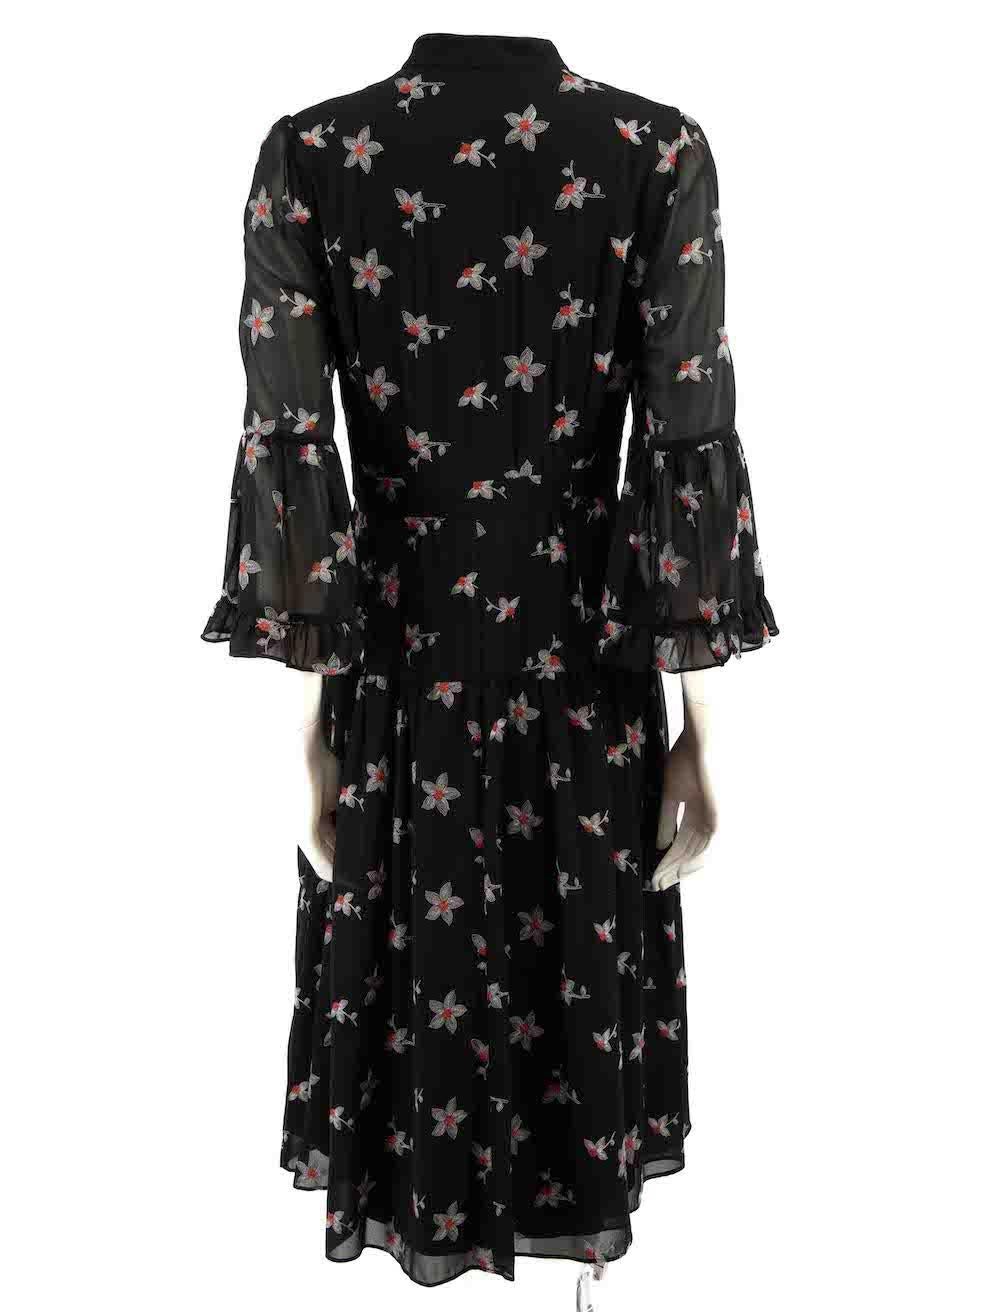 Women's Temperley London Black Floral Embroidered Dress Size L For Sale